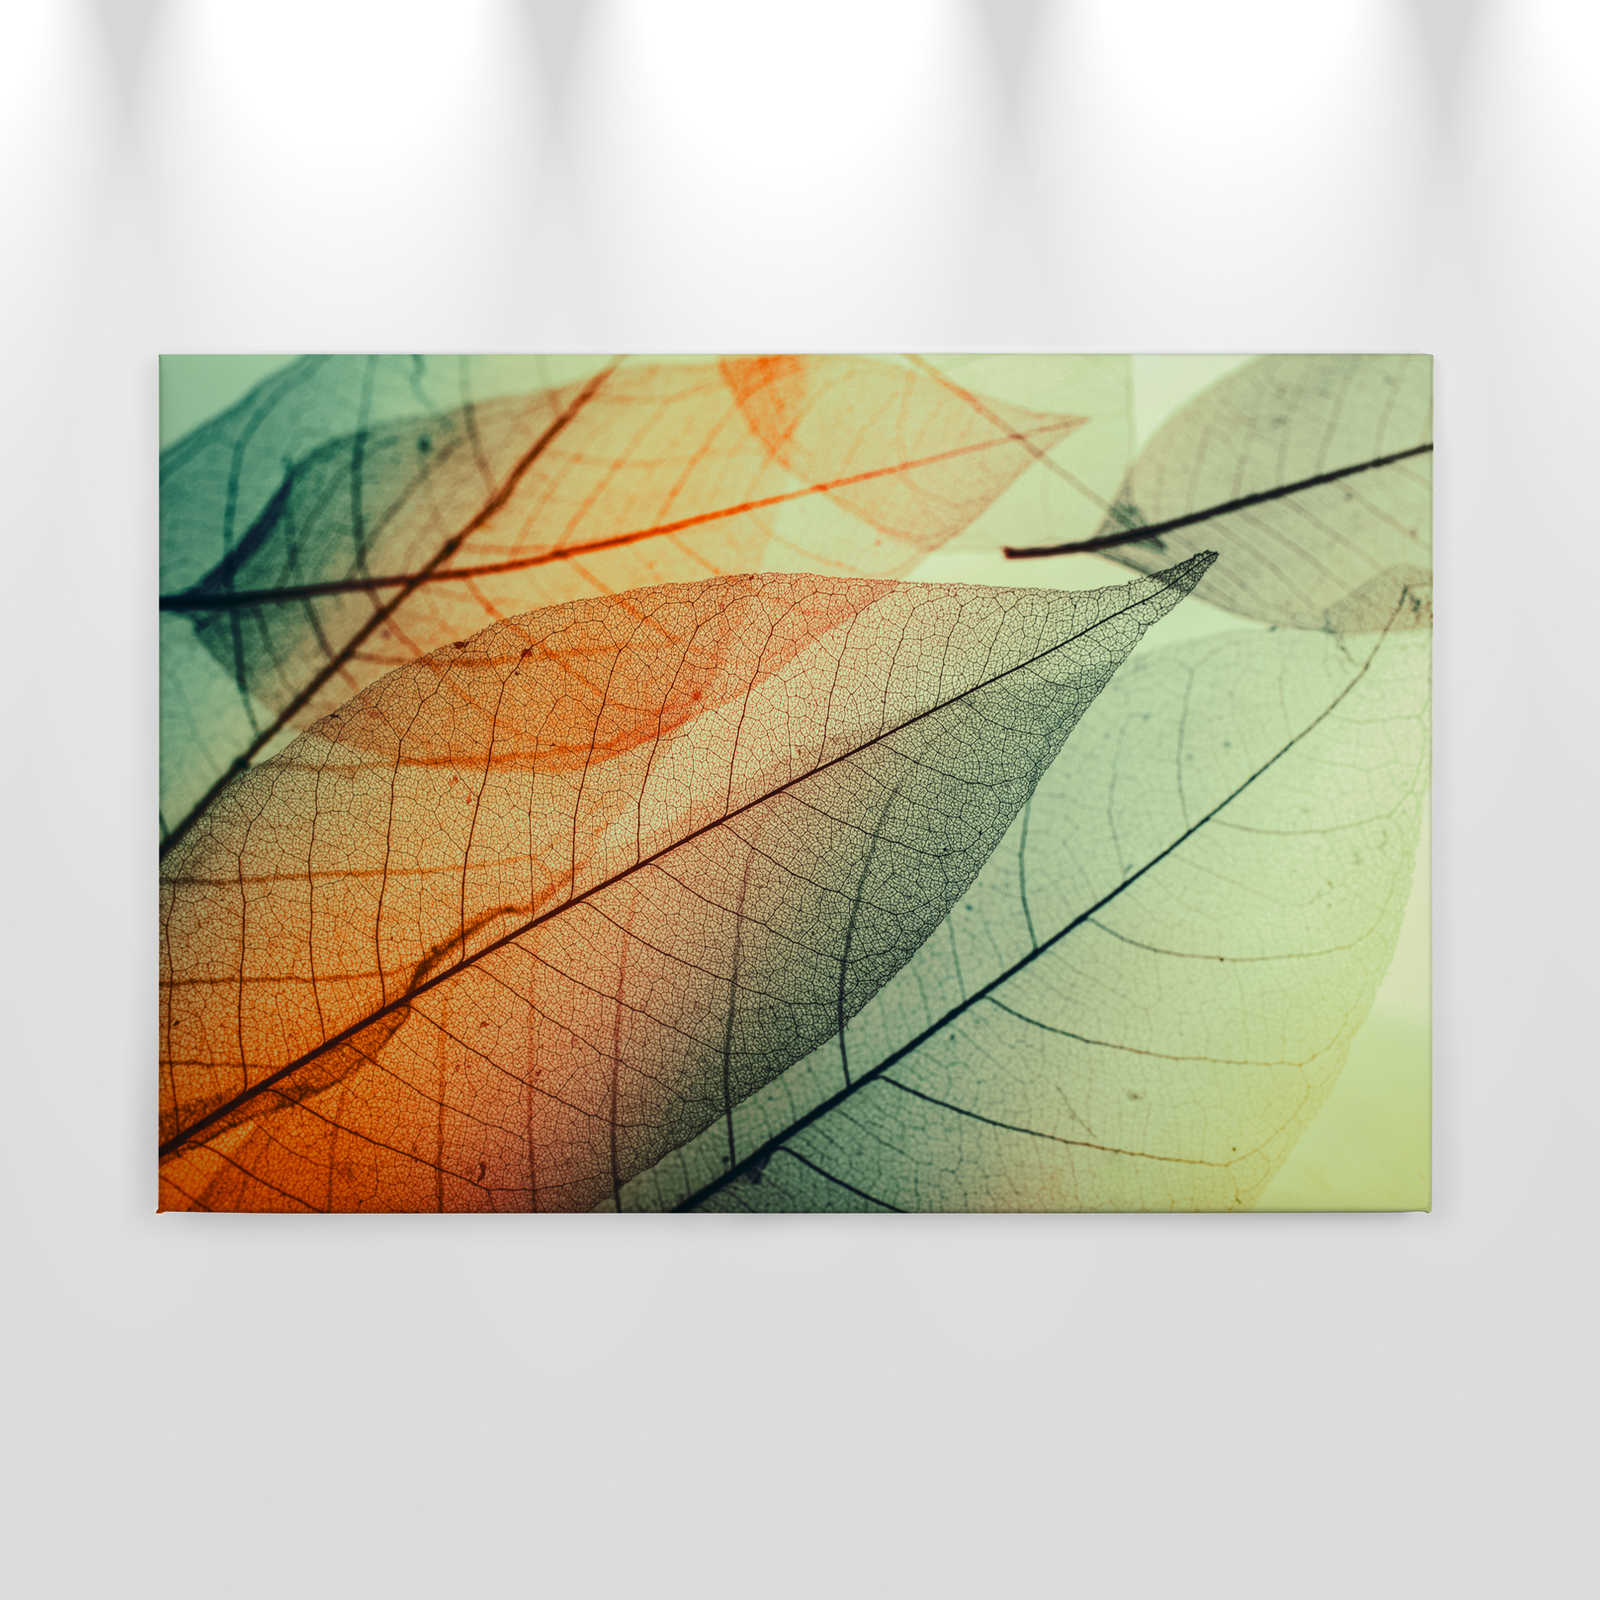             Canvas with leaves design - 0,90 m x 0,60 m
        